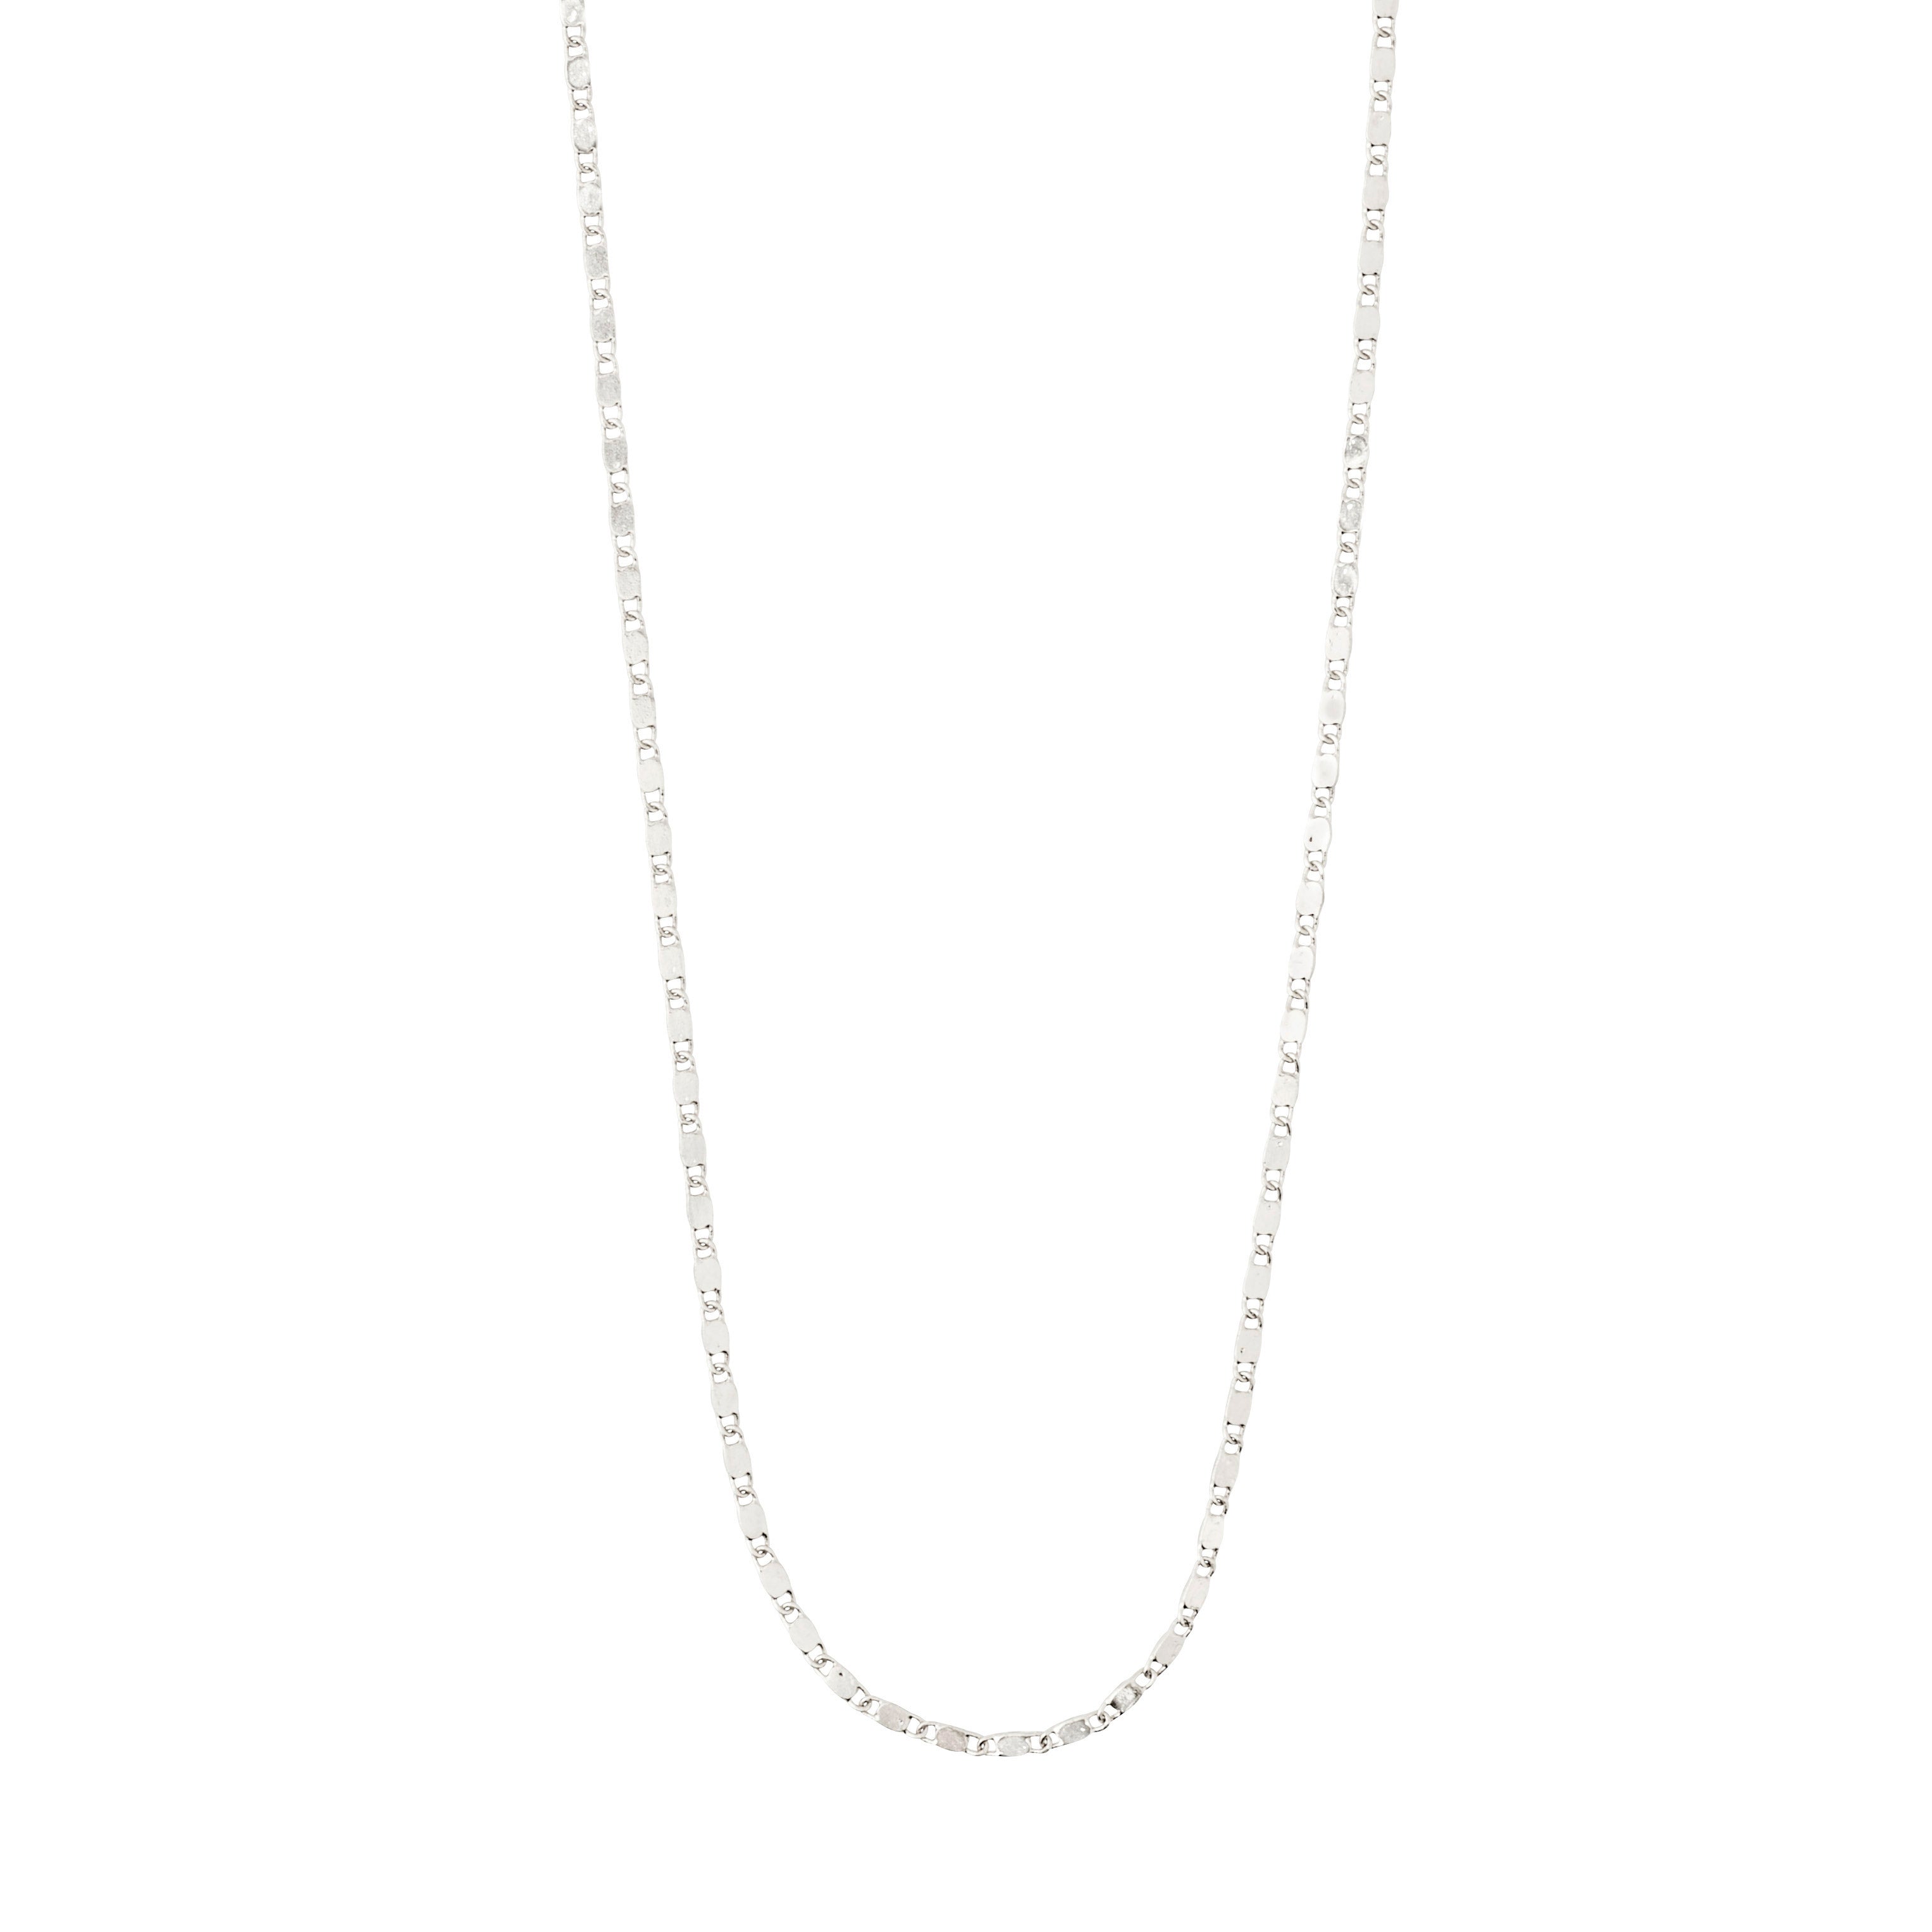 PARISA recycled flat link chain necklace silver-plated